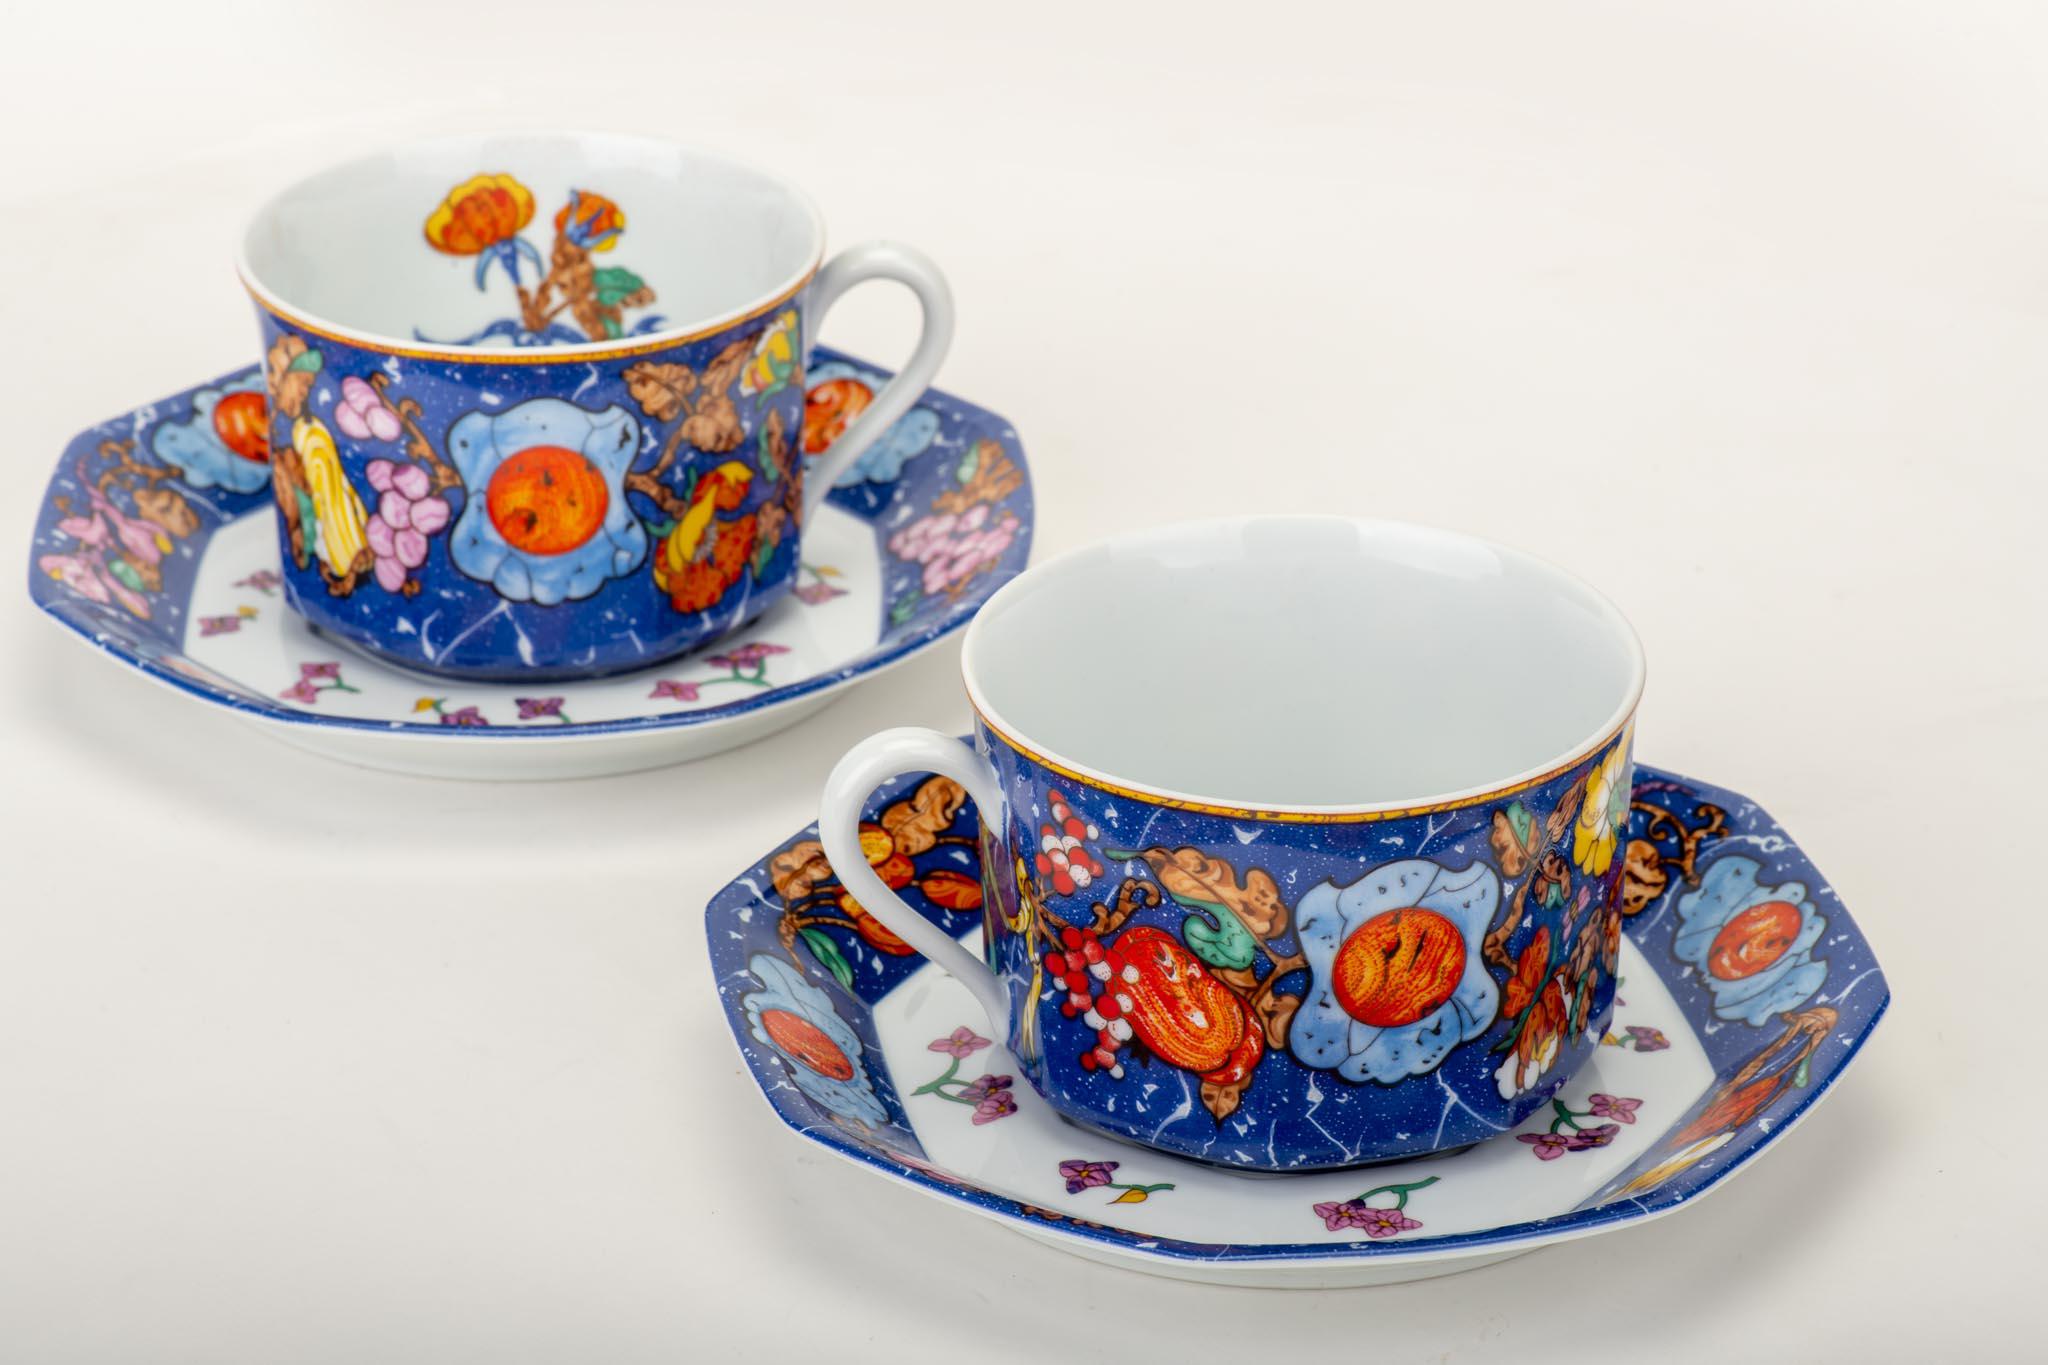 Set of two Hermès vintage teacups and saucers with an ornate design in multicolor. Come with original box.